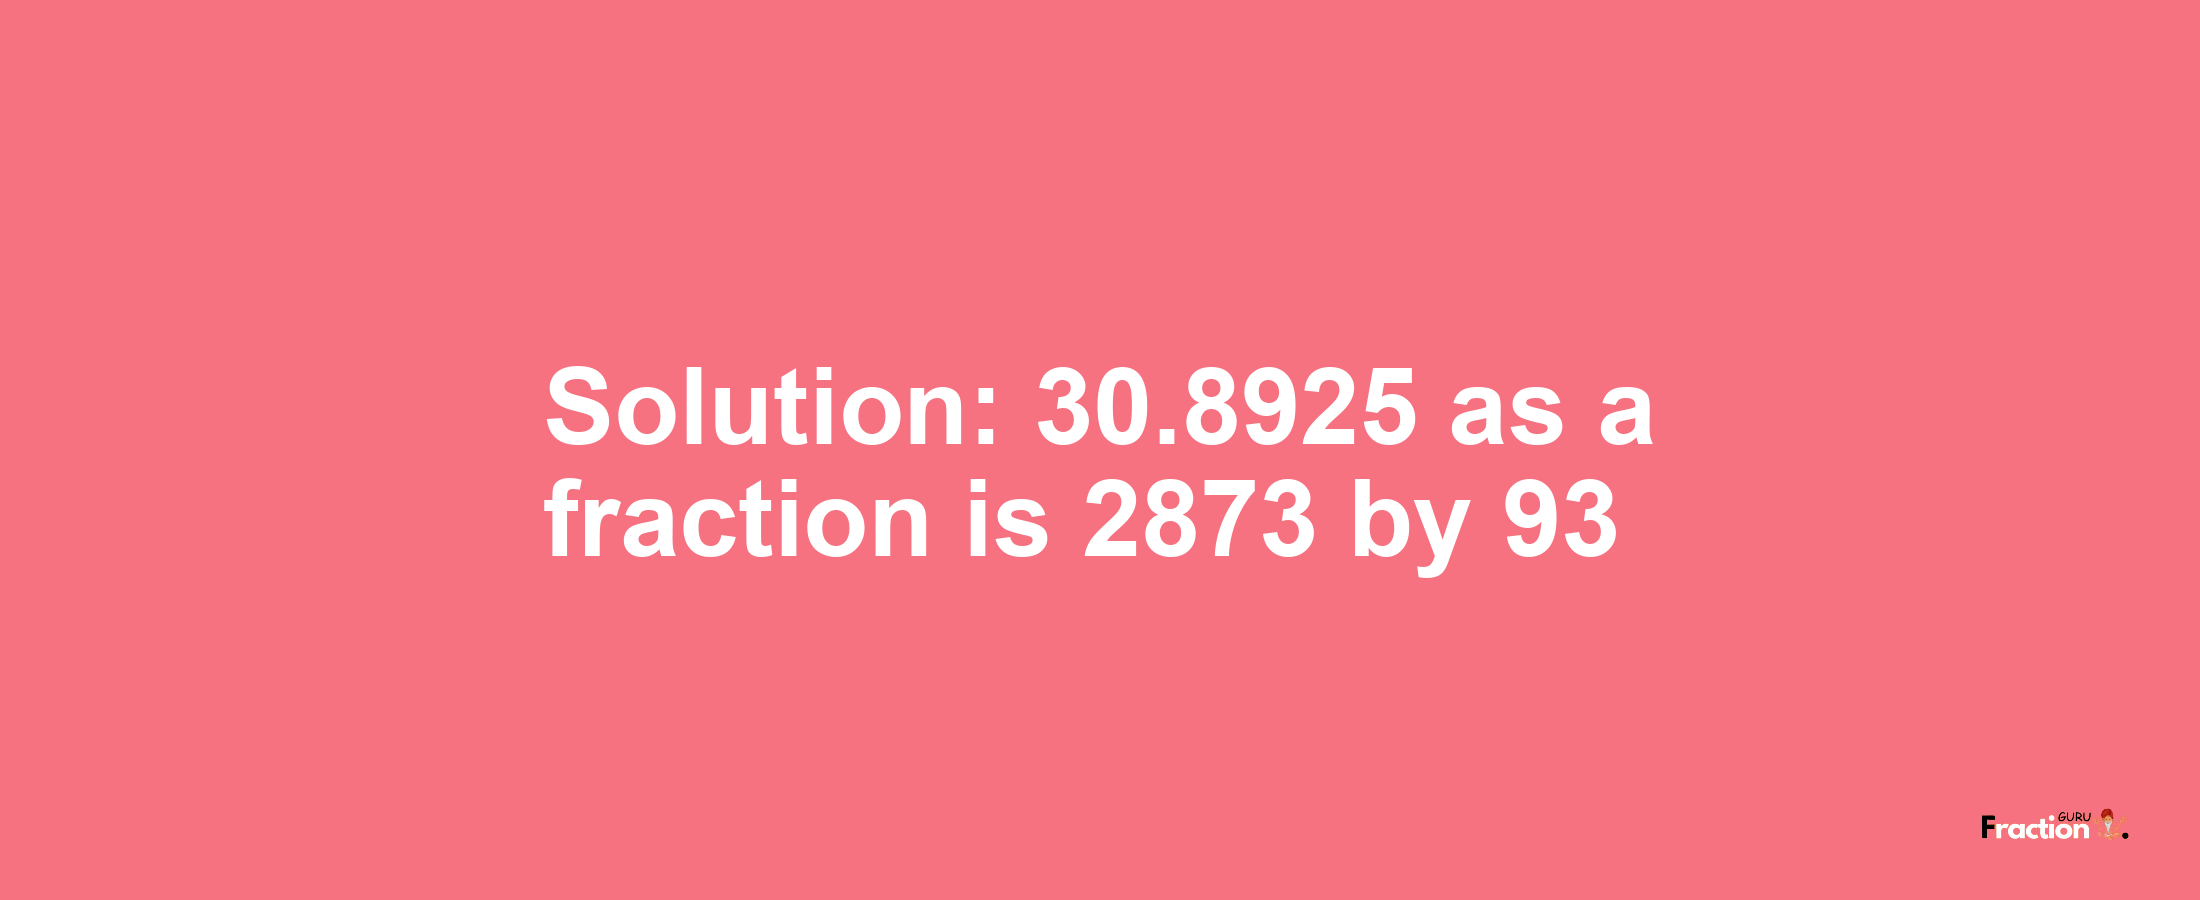 Solution:30.8925 as a fraction is 2873/93